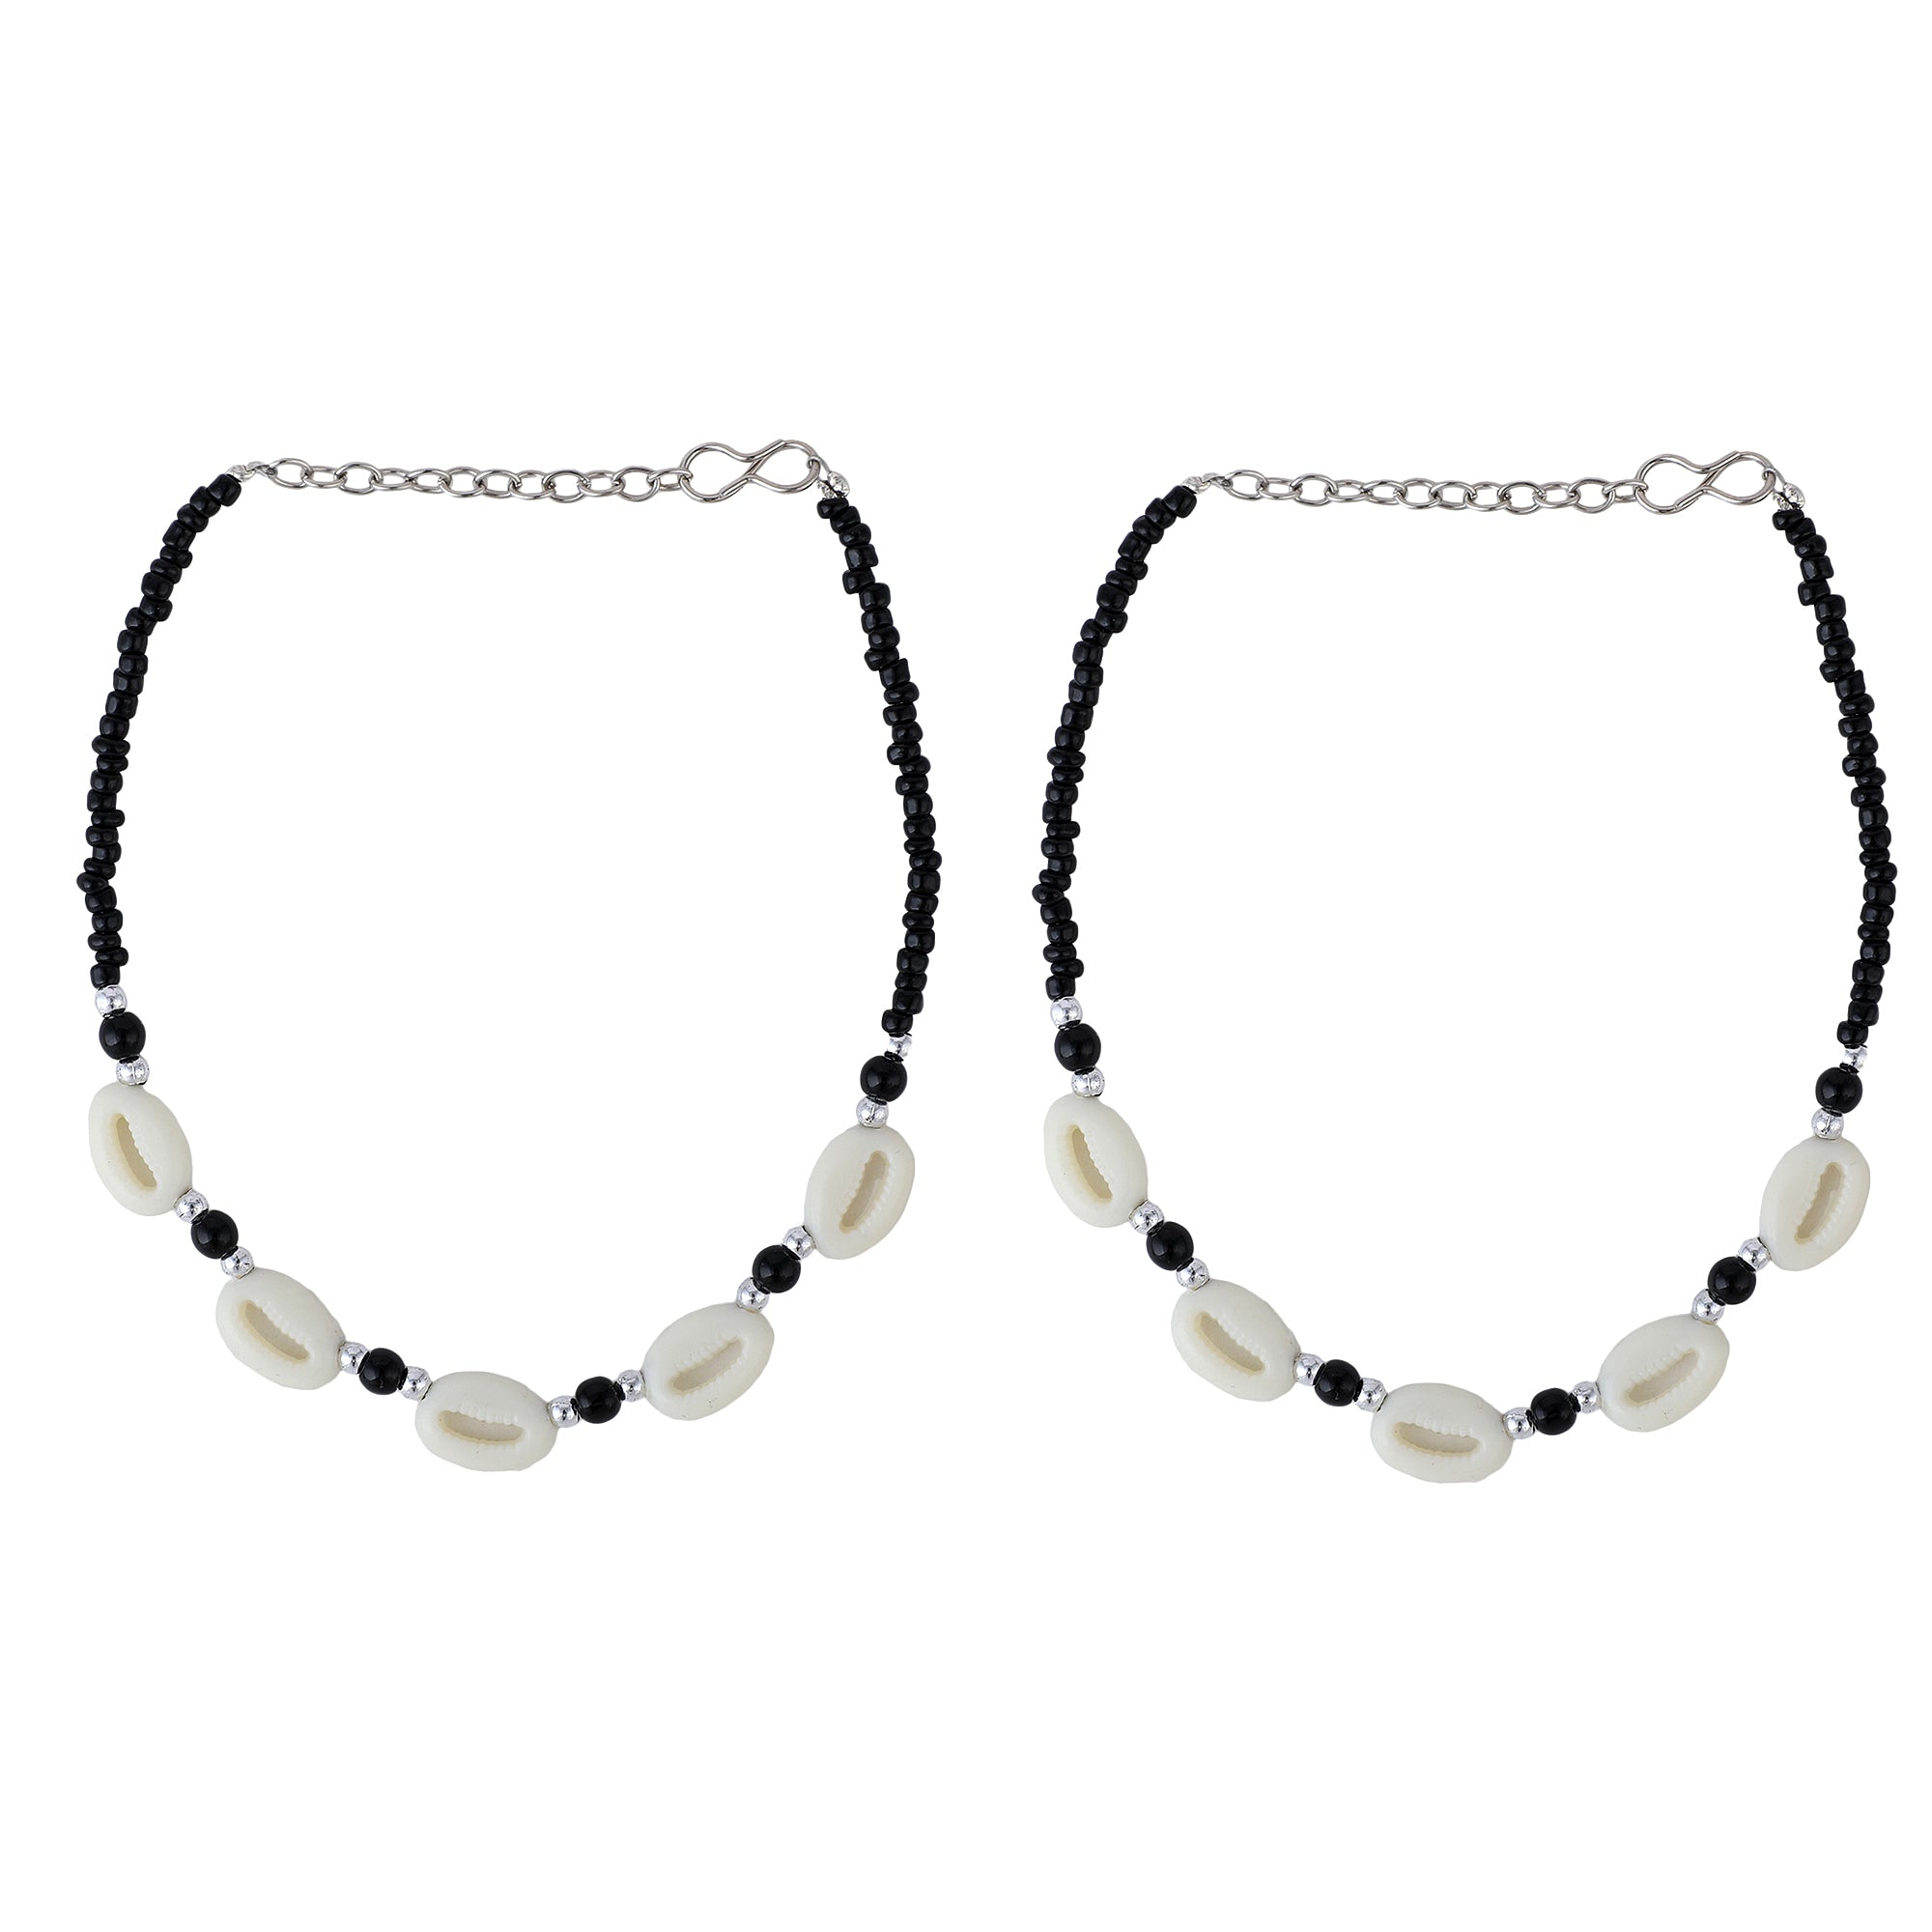 Women's Set Of 2 White Sea Shell And Black Beaded Hand Crafted Anklets - Anikas Creation